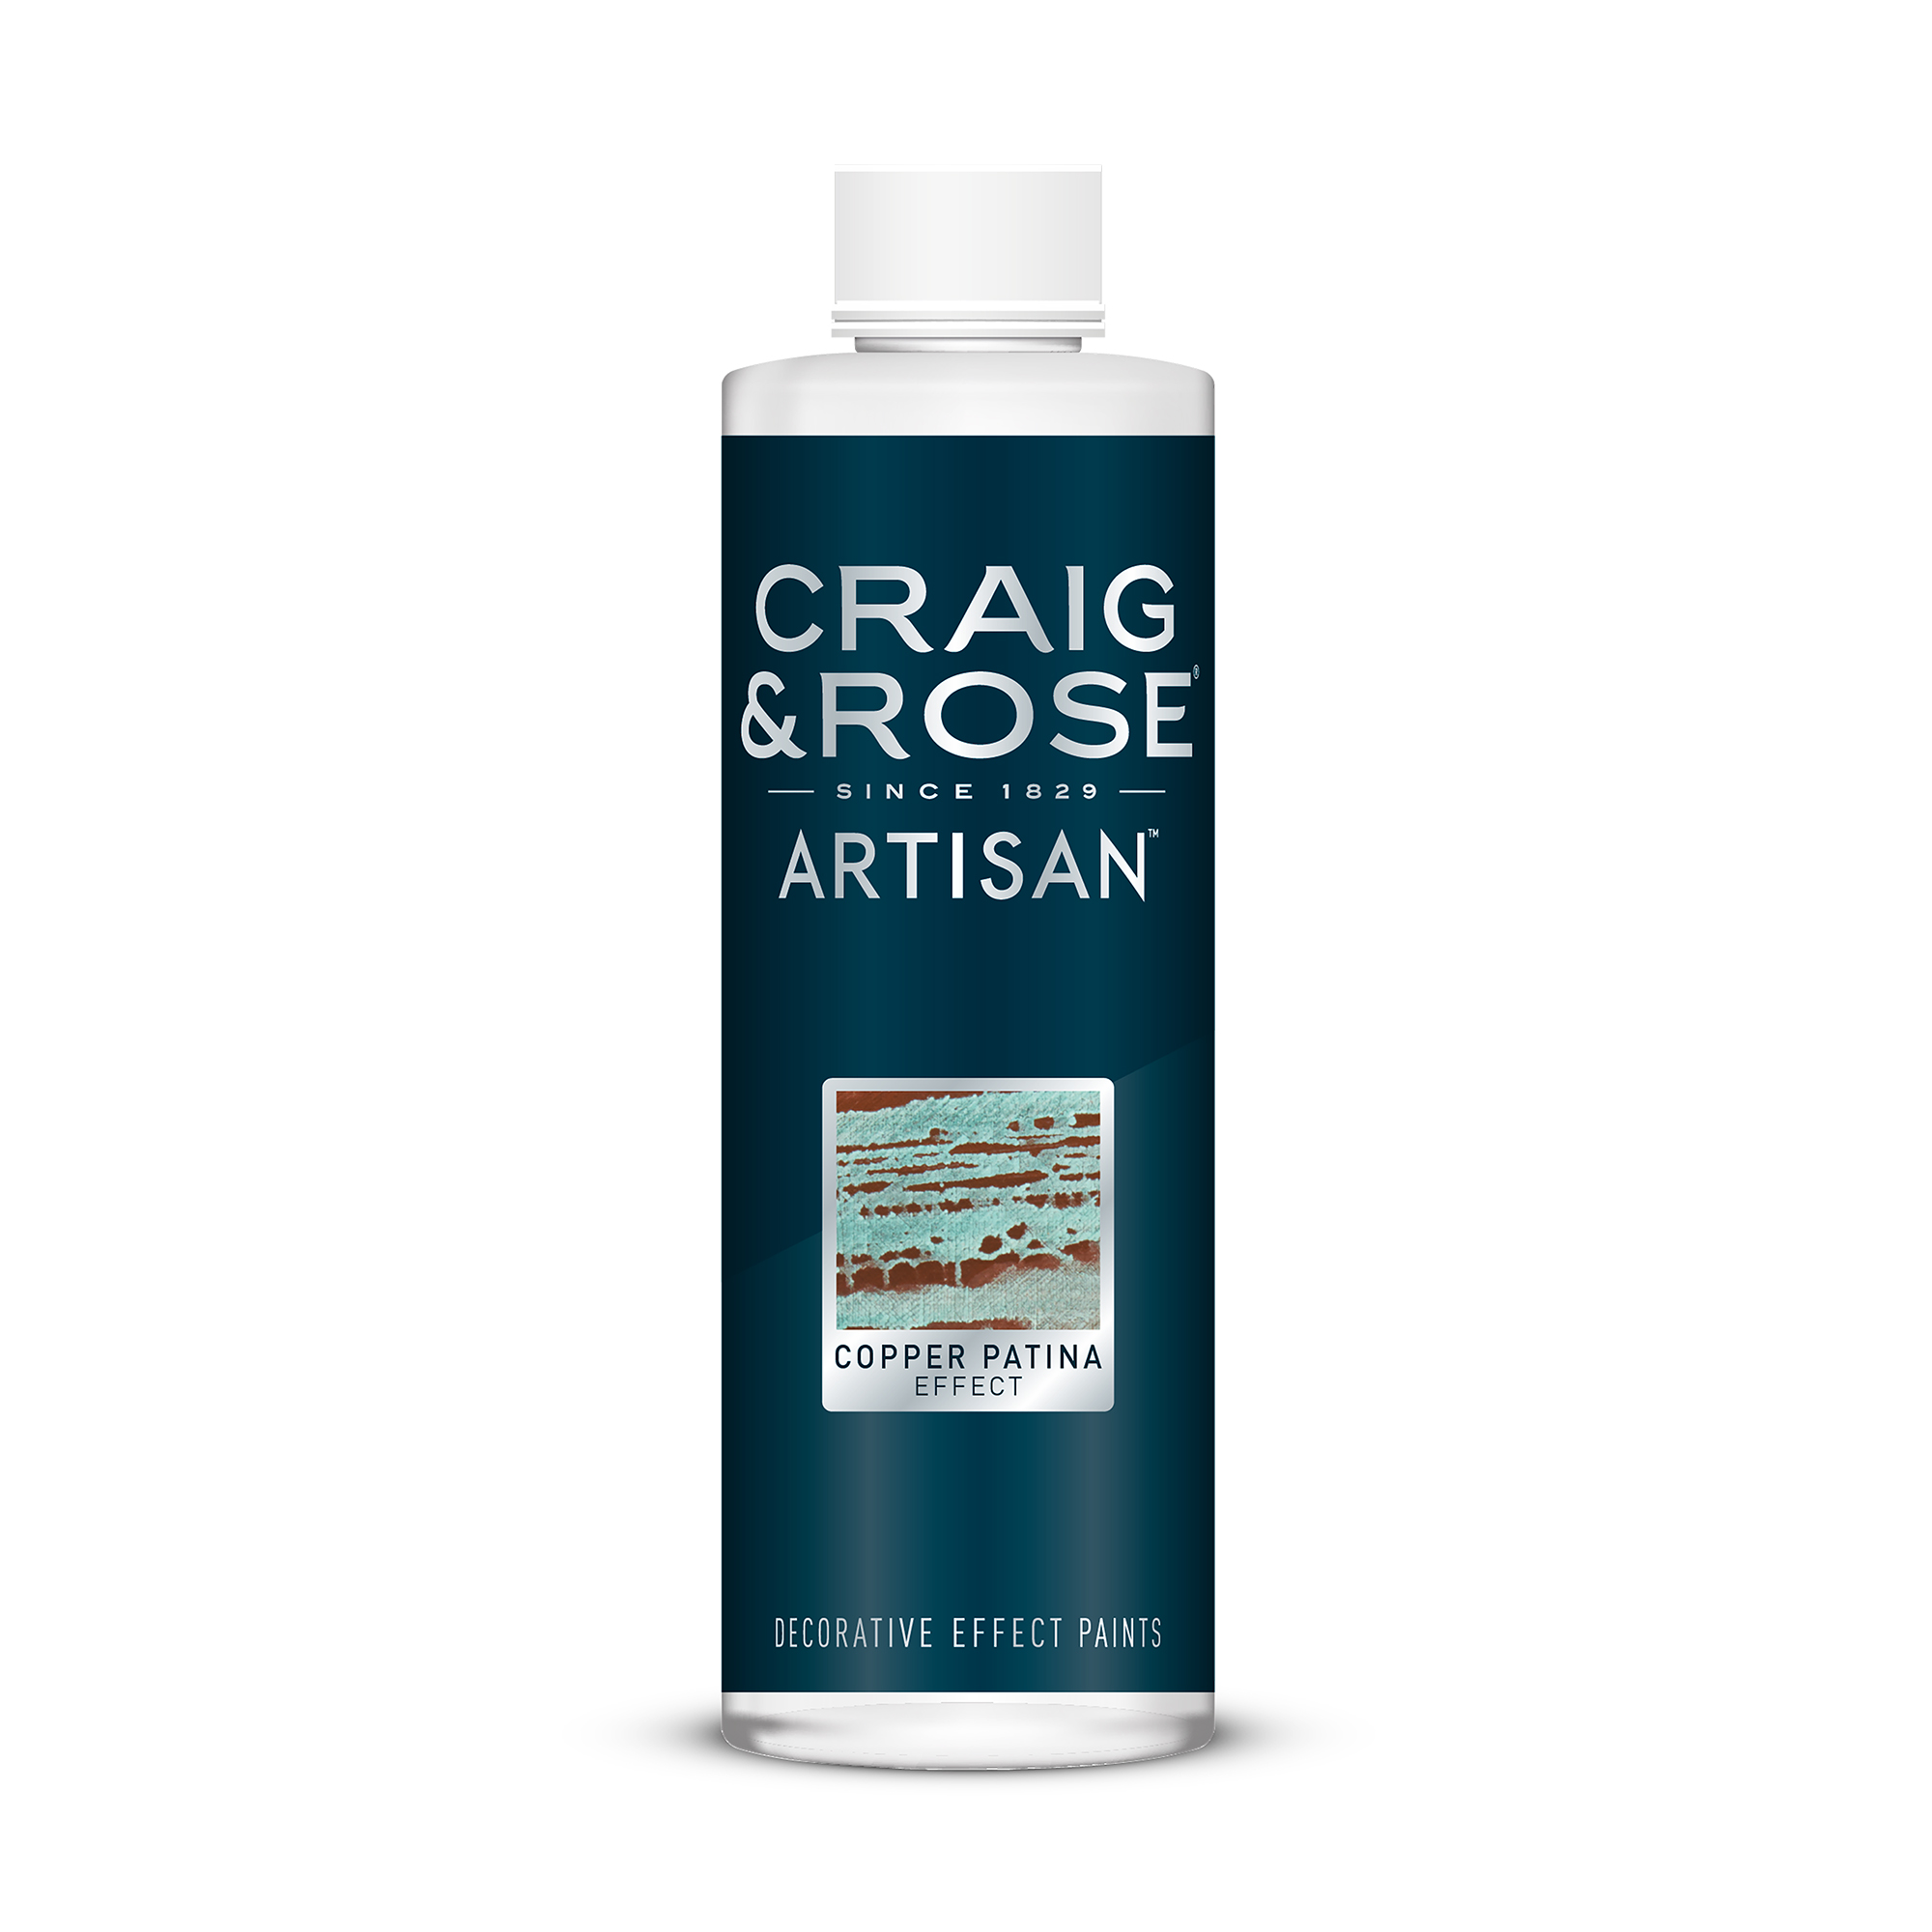 HOW TO APPLY ARTISAN COPPER EFFECT AND COPPER PATINA – Craig & Rose